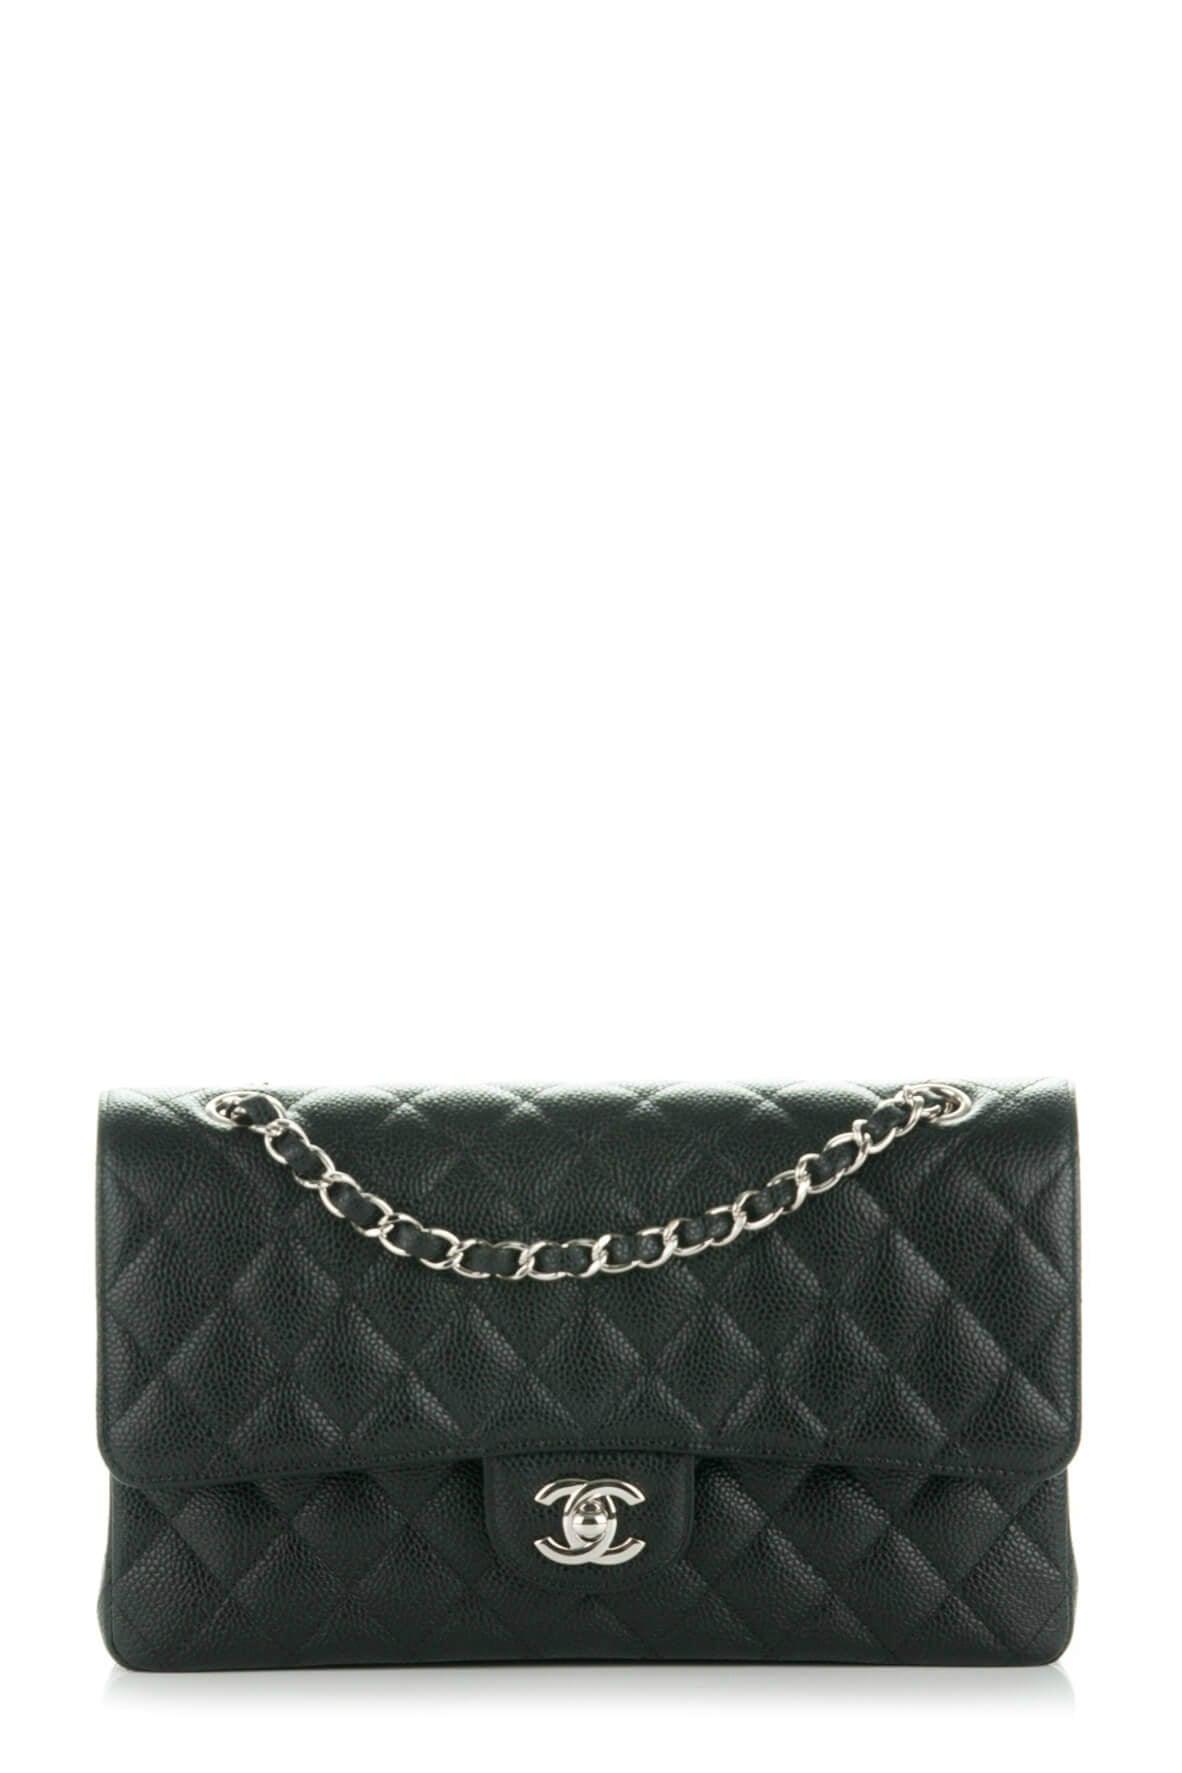 Quilted Caviar Medium Classic Flap Bag Black with Silver Hardware